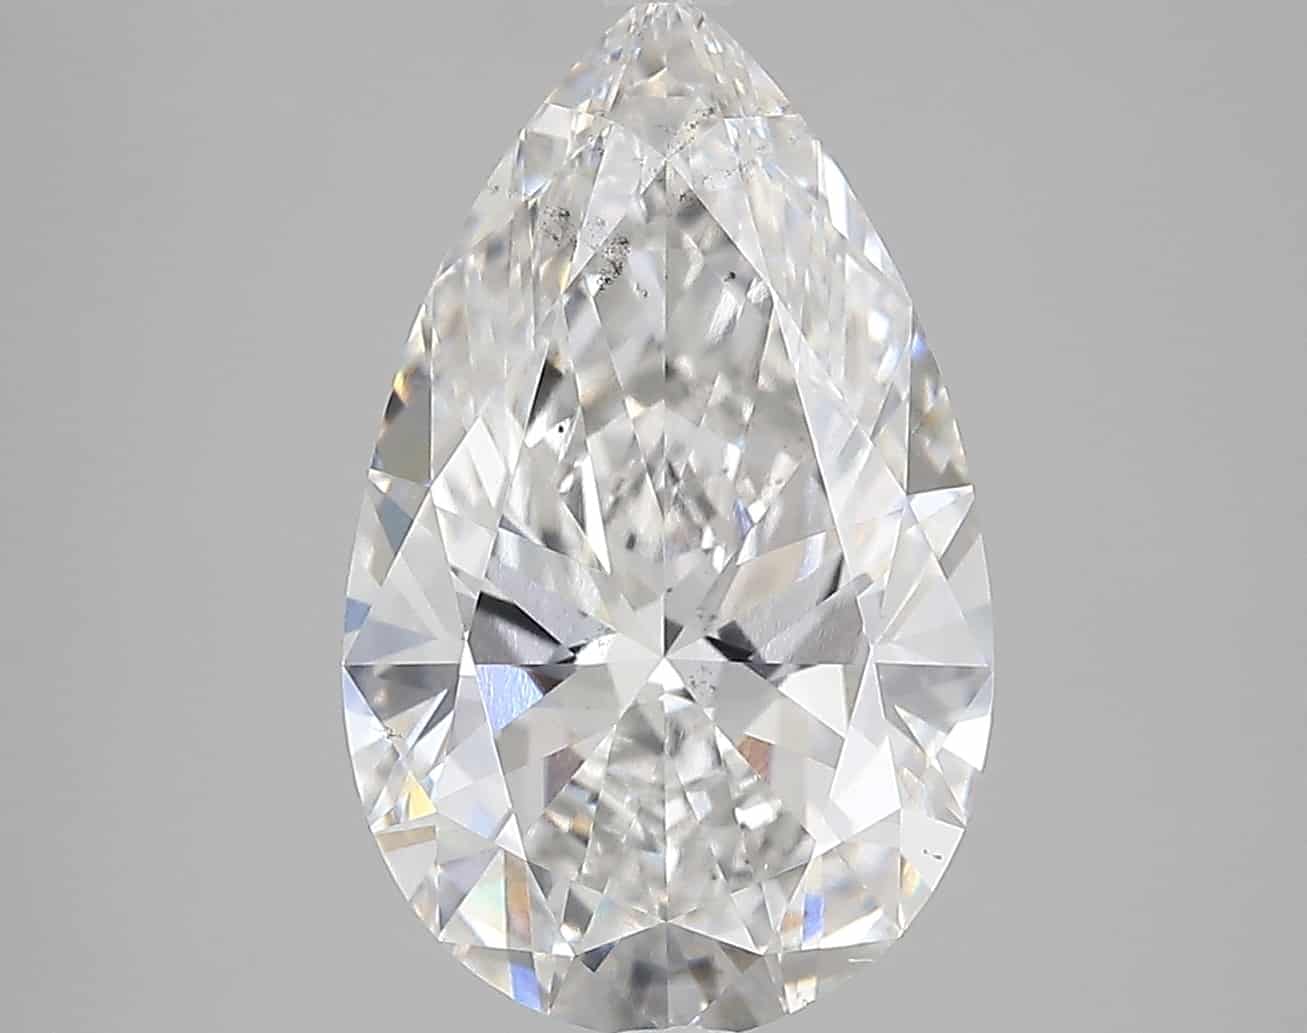 Lab Grown 4.51 Carat Diamond IGI Certified si1 clarity and F color